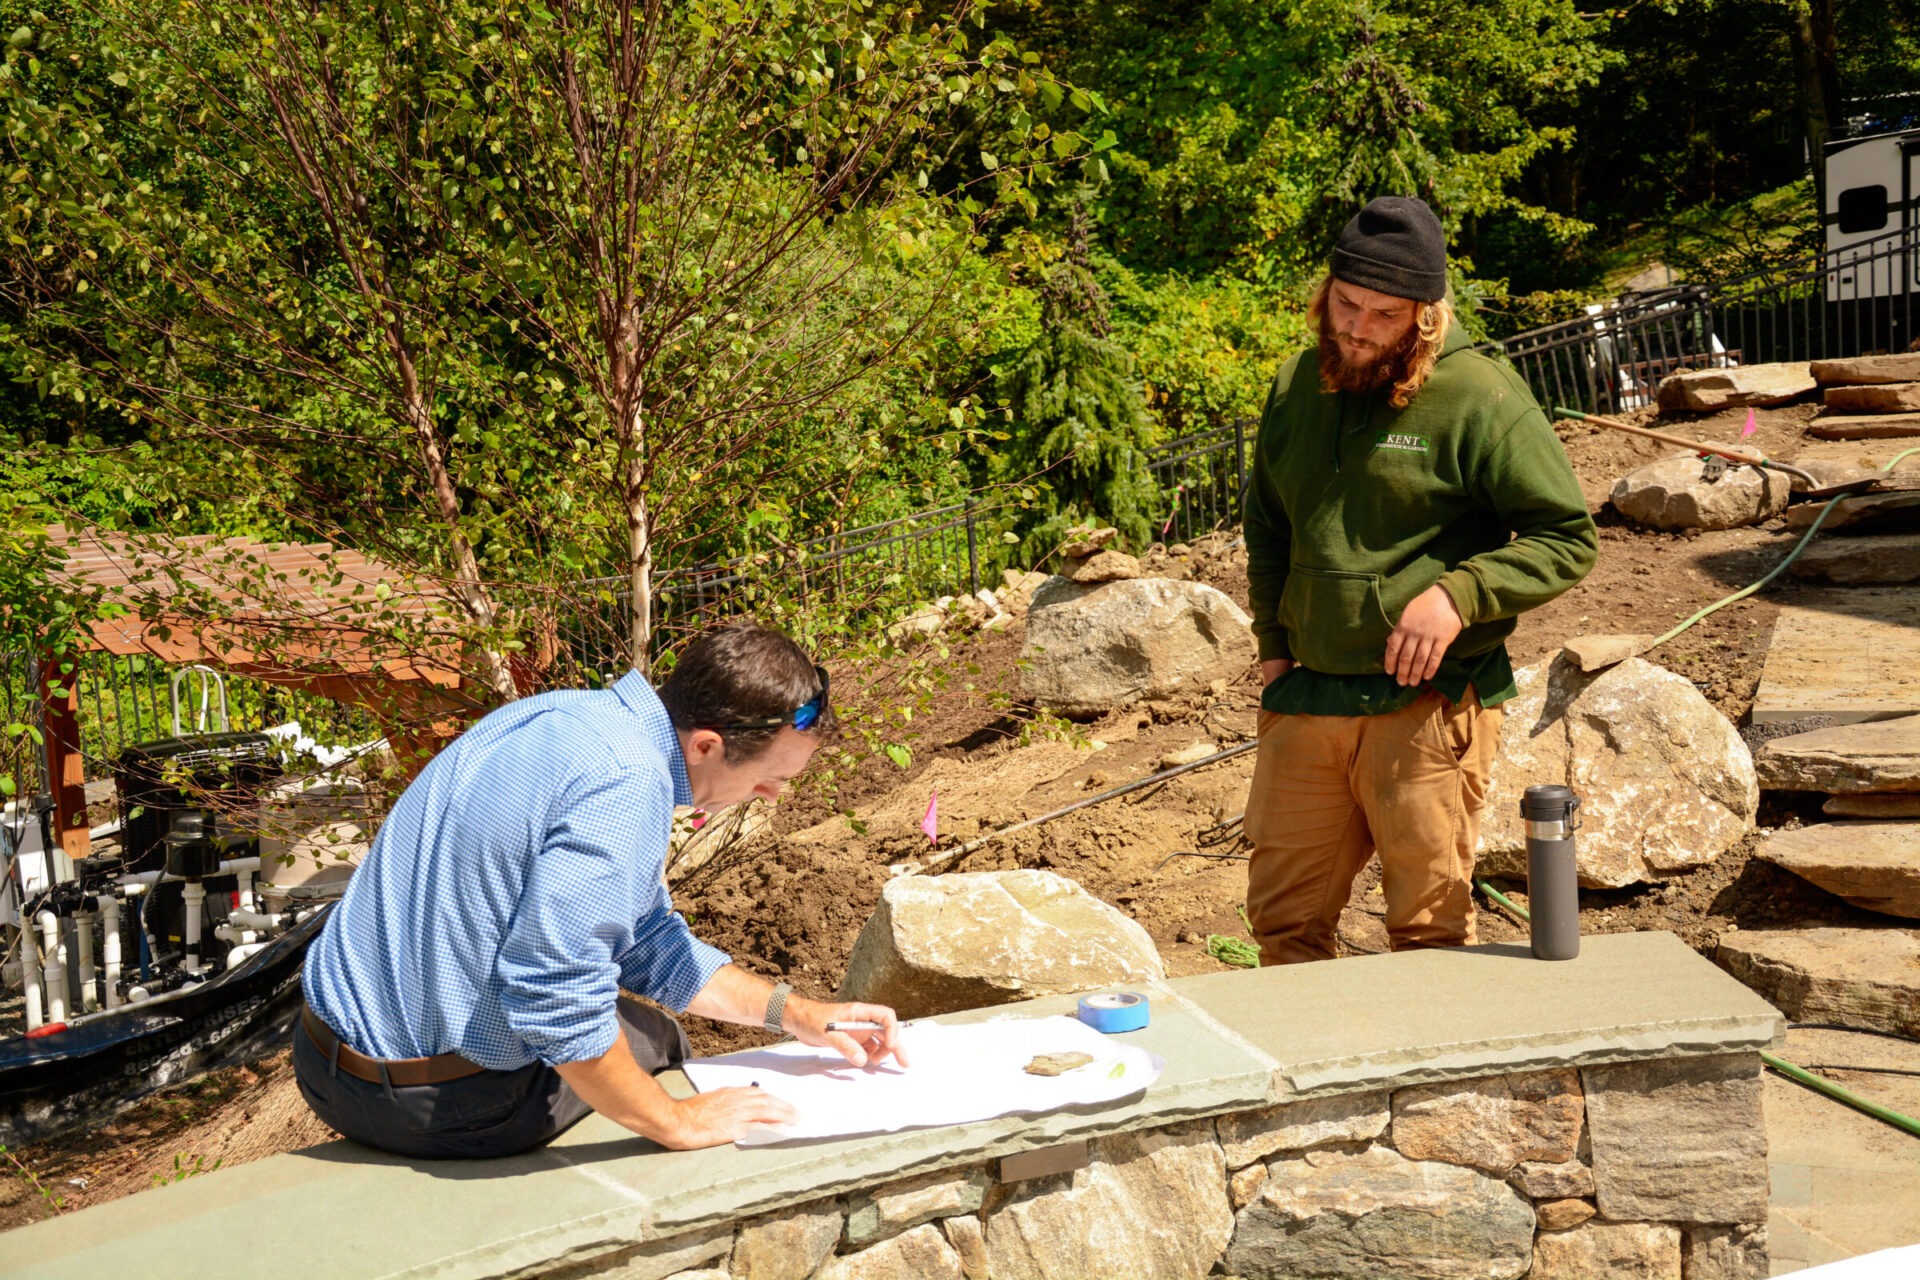 Two people are outdoors; one is reviewing plans on a stone wall while the other observes. They are surrounded by trees, boulders, and garden equipment.